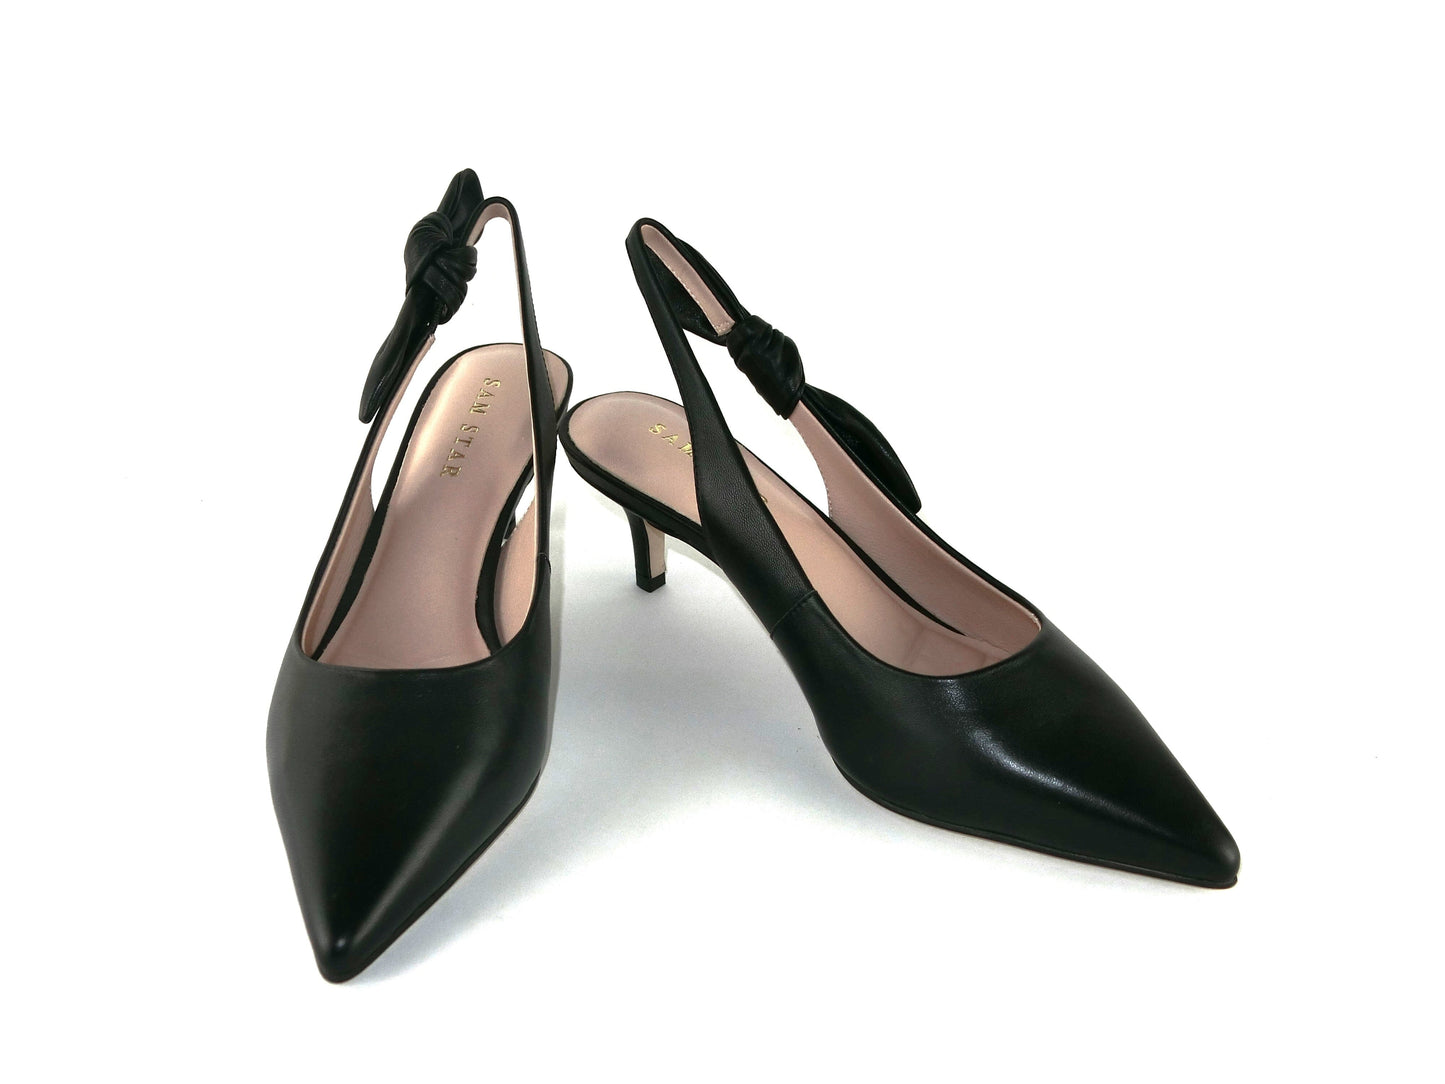 SS23006 Leather court shoes with sling back design (removable bow) Black and Beige ladies shoes Sam Star shoes 